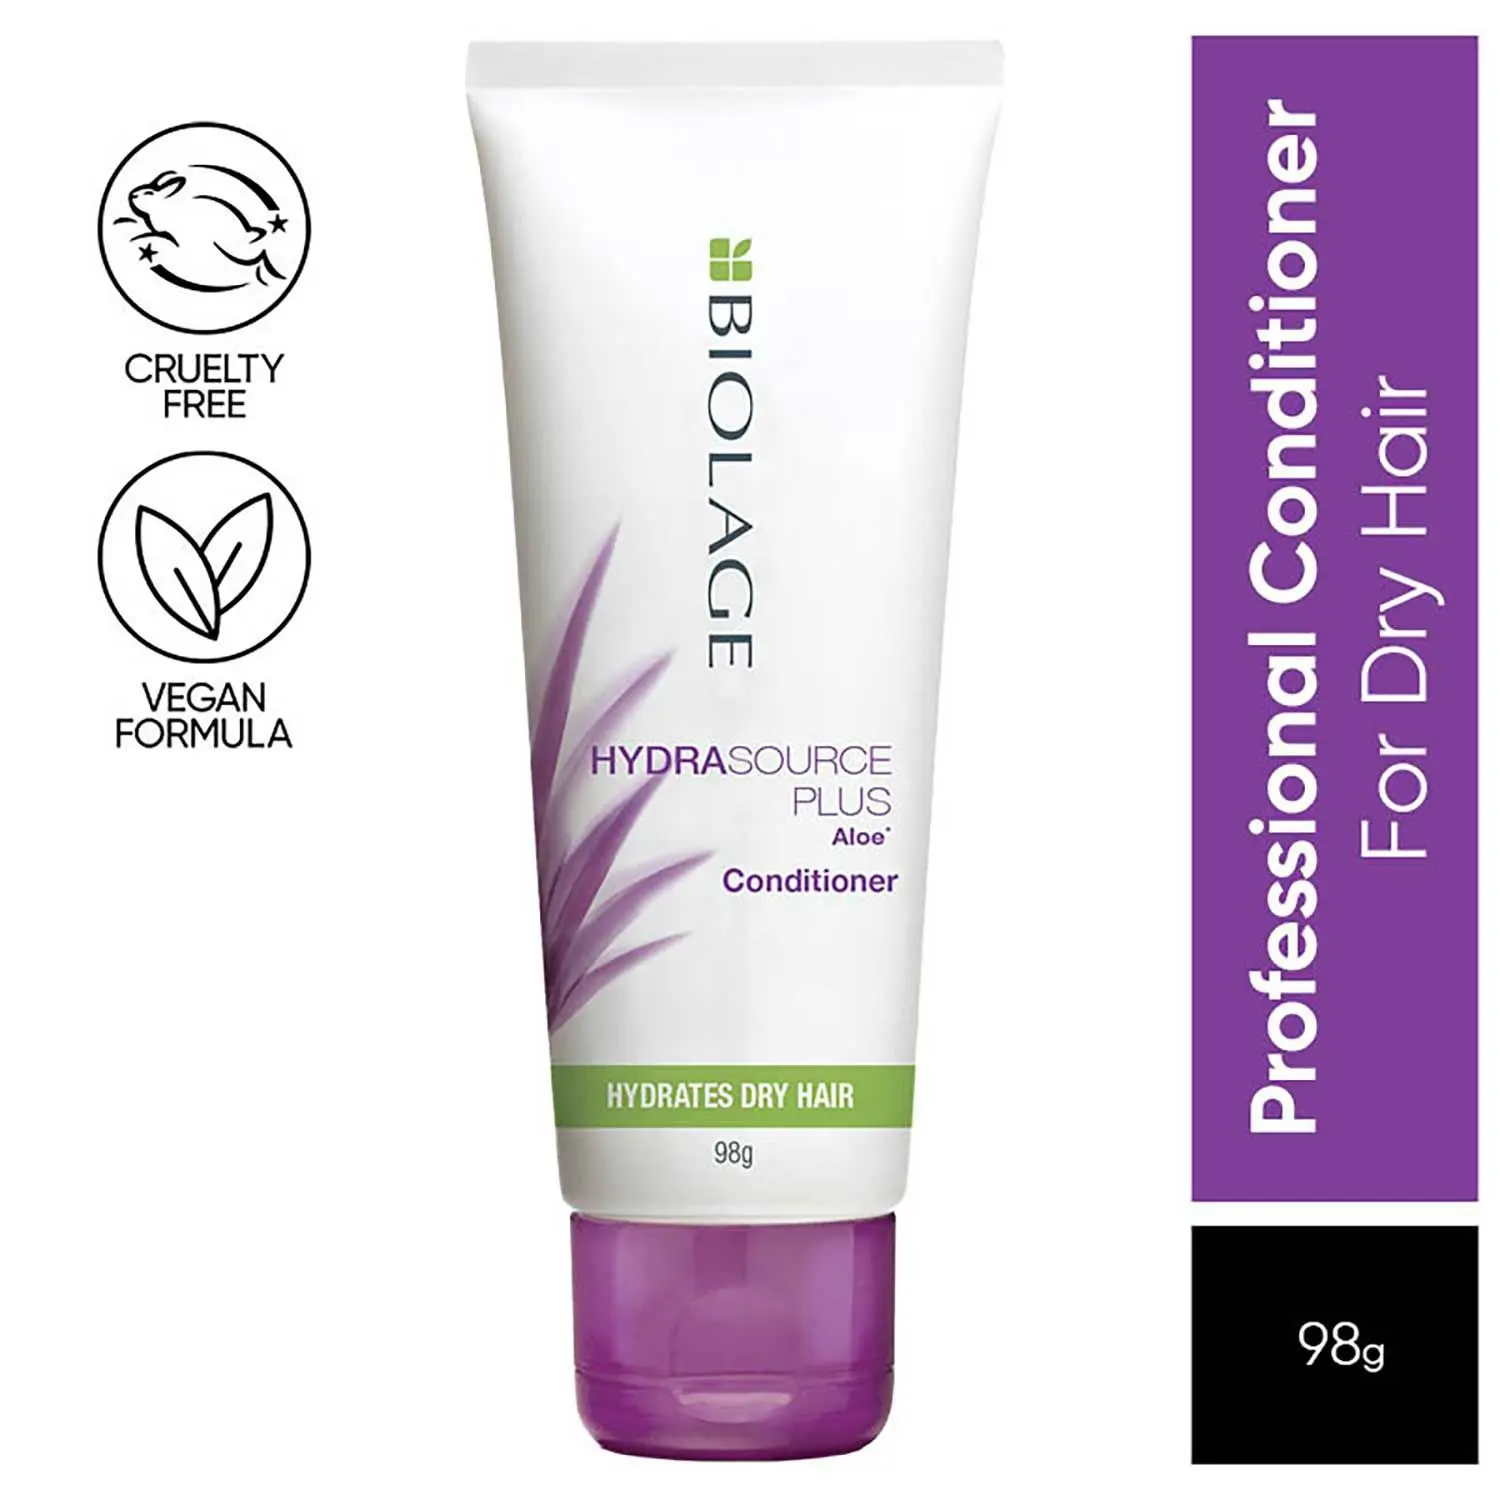 BIOLAGE Hydrasource Plus Aloe Conditioner 98g | Paraben free|Intensely hydrates dry hair | For Dry Hair